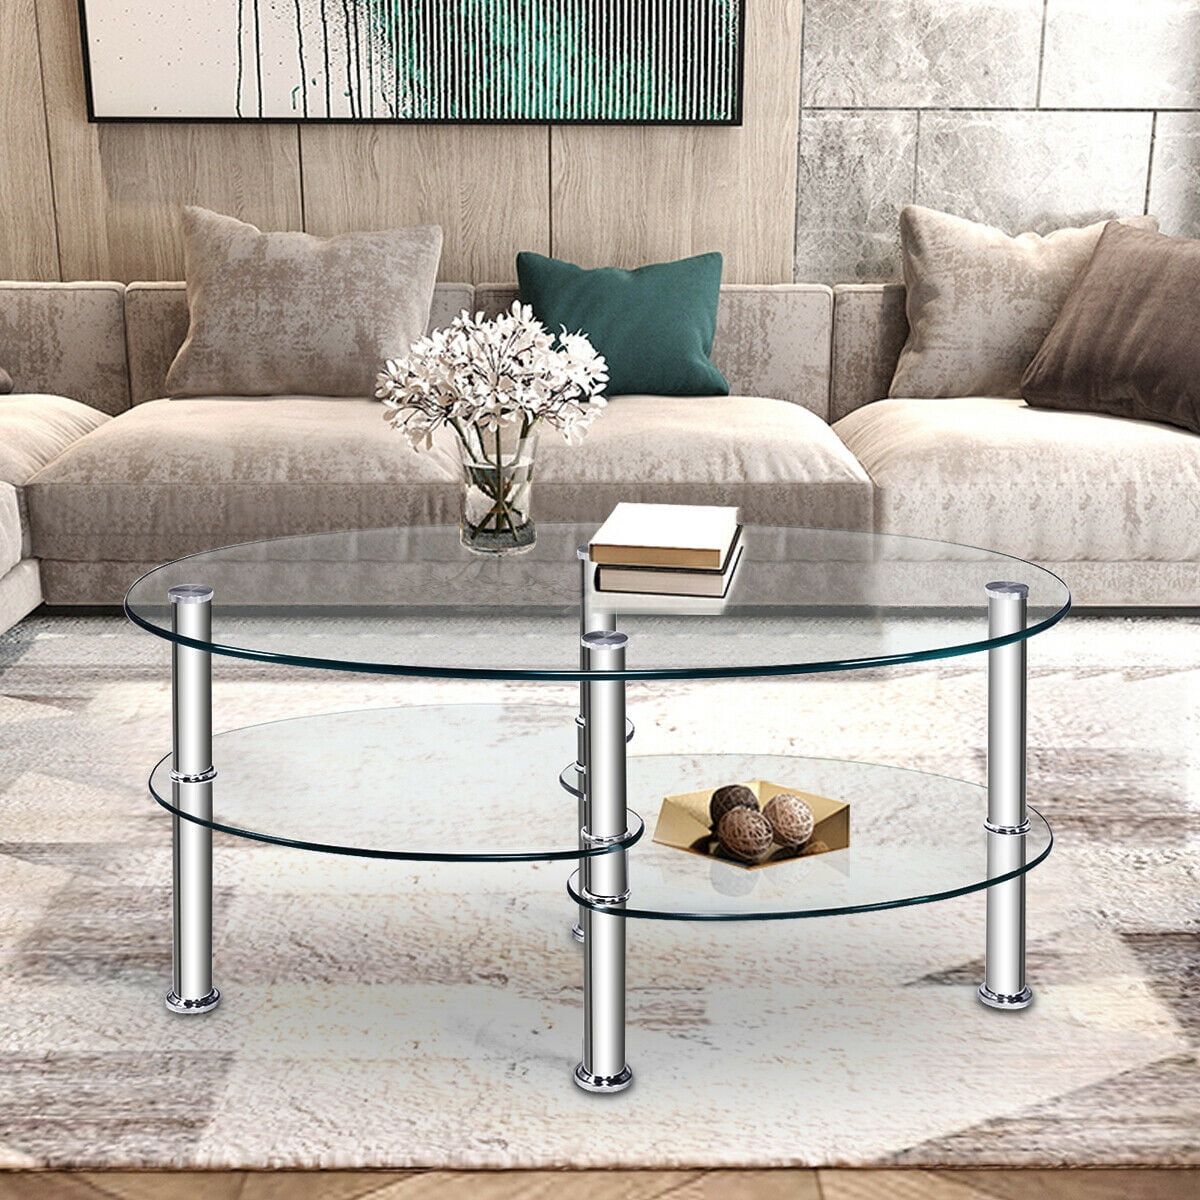 Costway Tempered Glass Oval Side Coffee Table Shelf Chrome Base Living Regarding Glass Coffee Tables With Lower Shelves (Gallery 15 of 20)